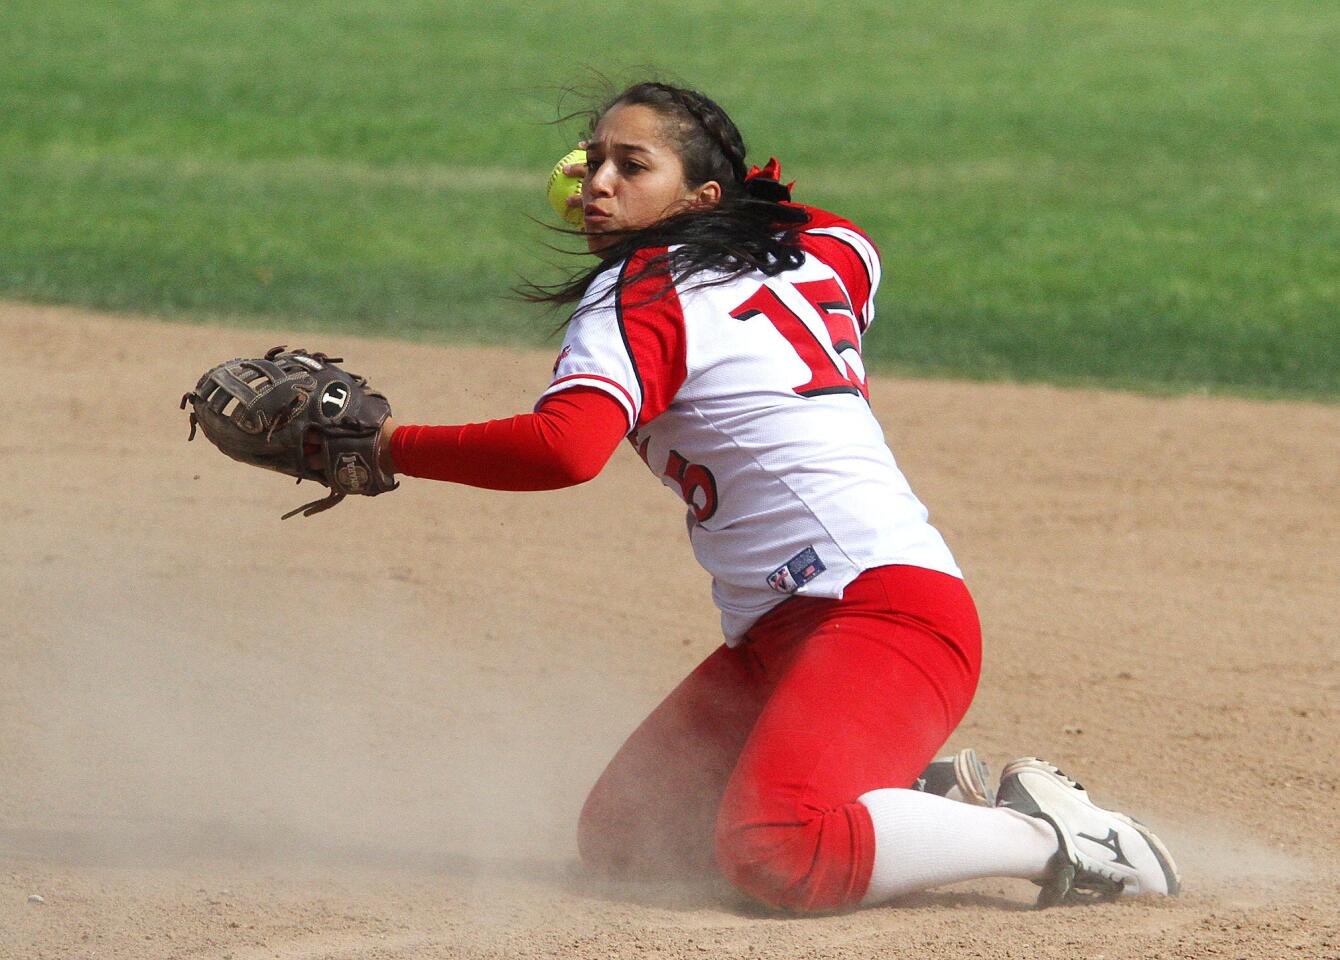 Burroughs' Aimee Rodriguez, at second base, dives and spins to make the throw for an out at first base against Glendale in a Pacific League softball game at Olive Park in Burbank on April 1, 2014. Burroughs won the game by mercy.